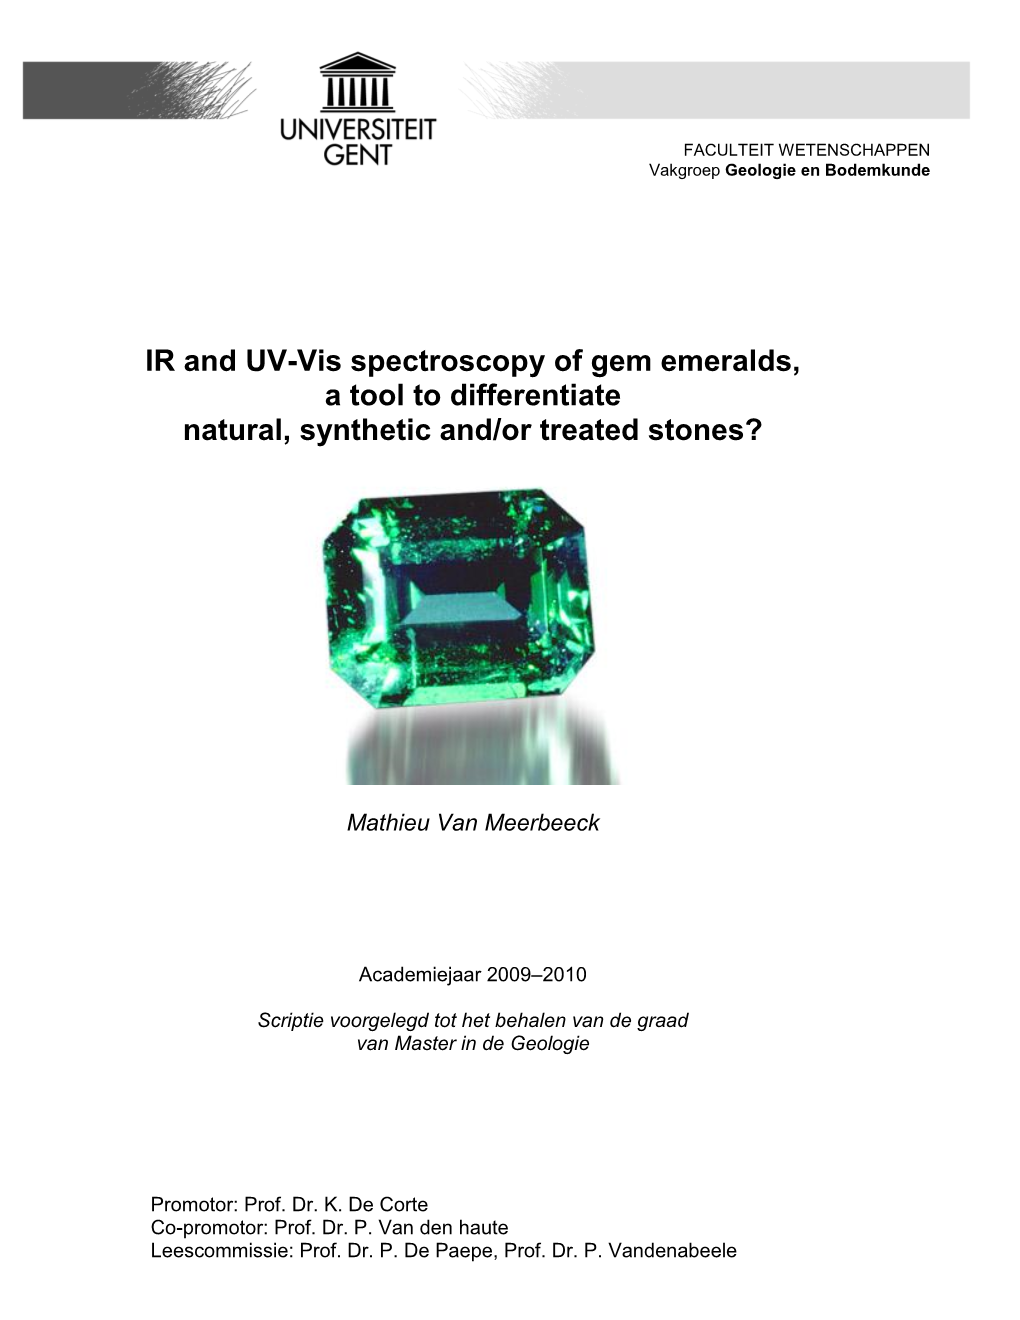 IR and UV-Vis Spectroscopy of Gem Emeralds, a Tool to Differentiate Natural, Synthetic And/Or Treated Stones?